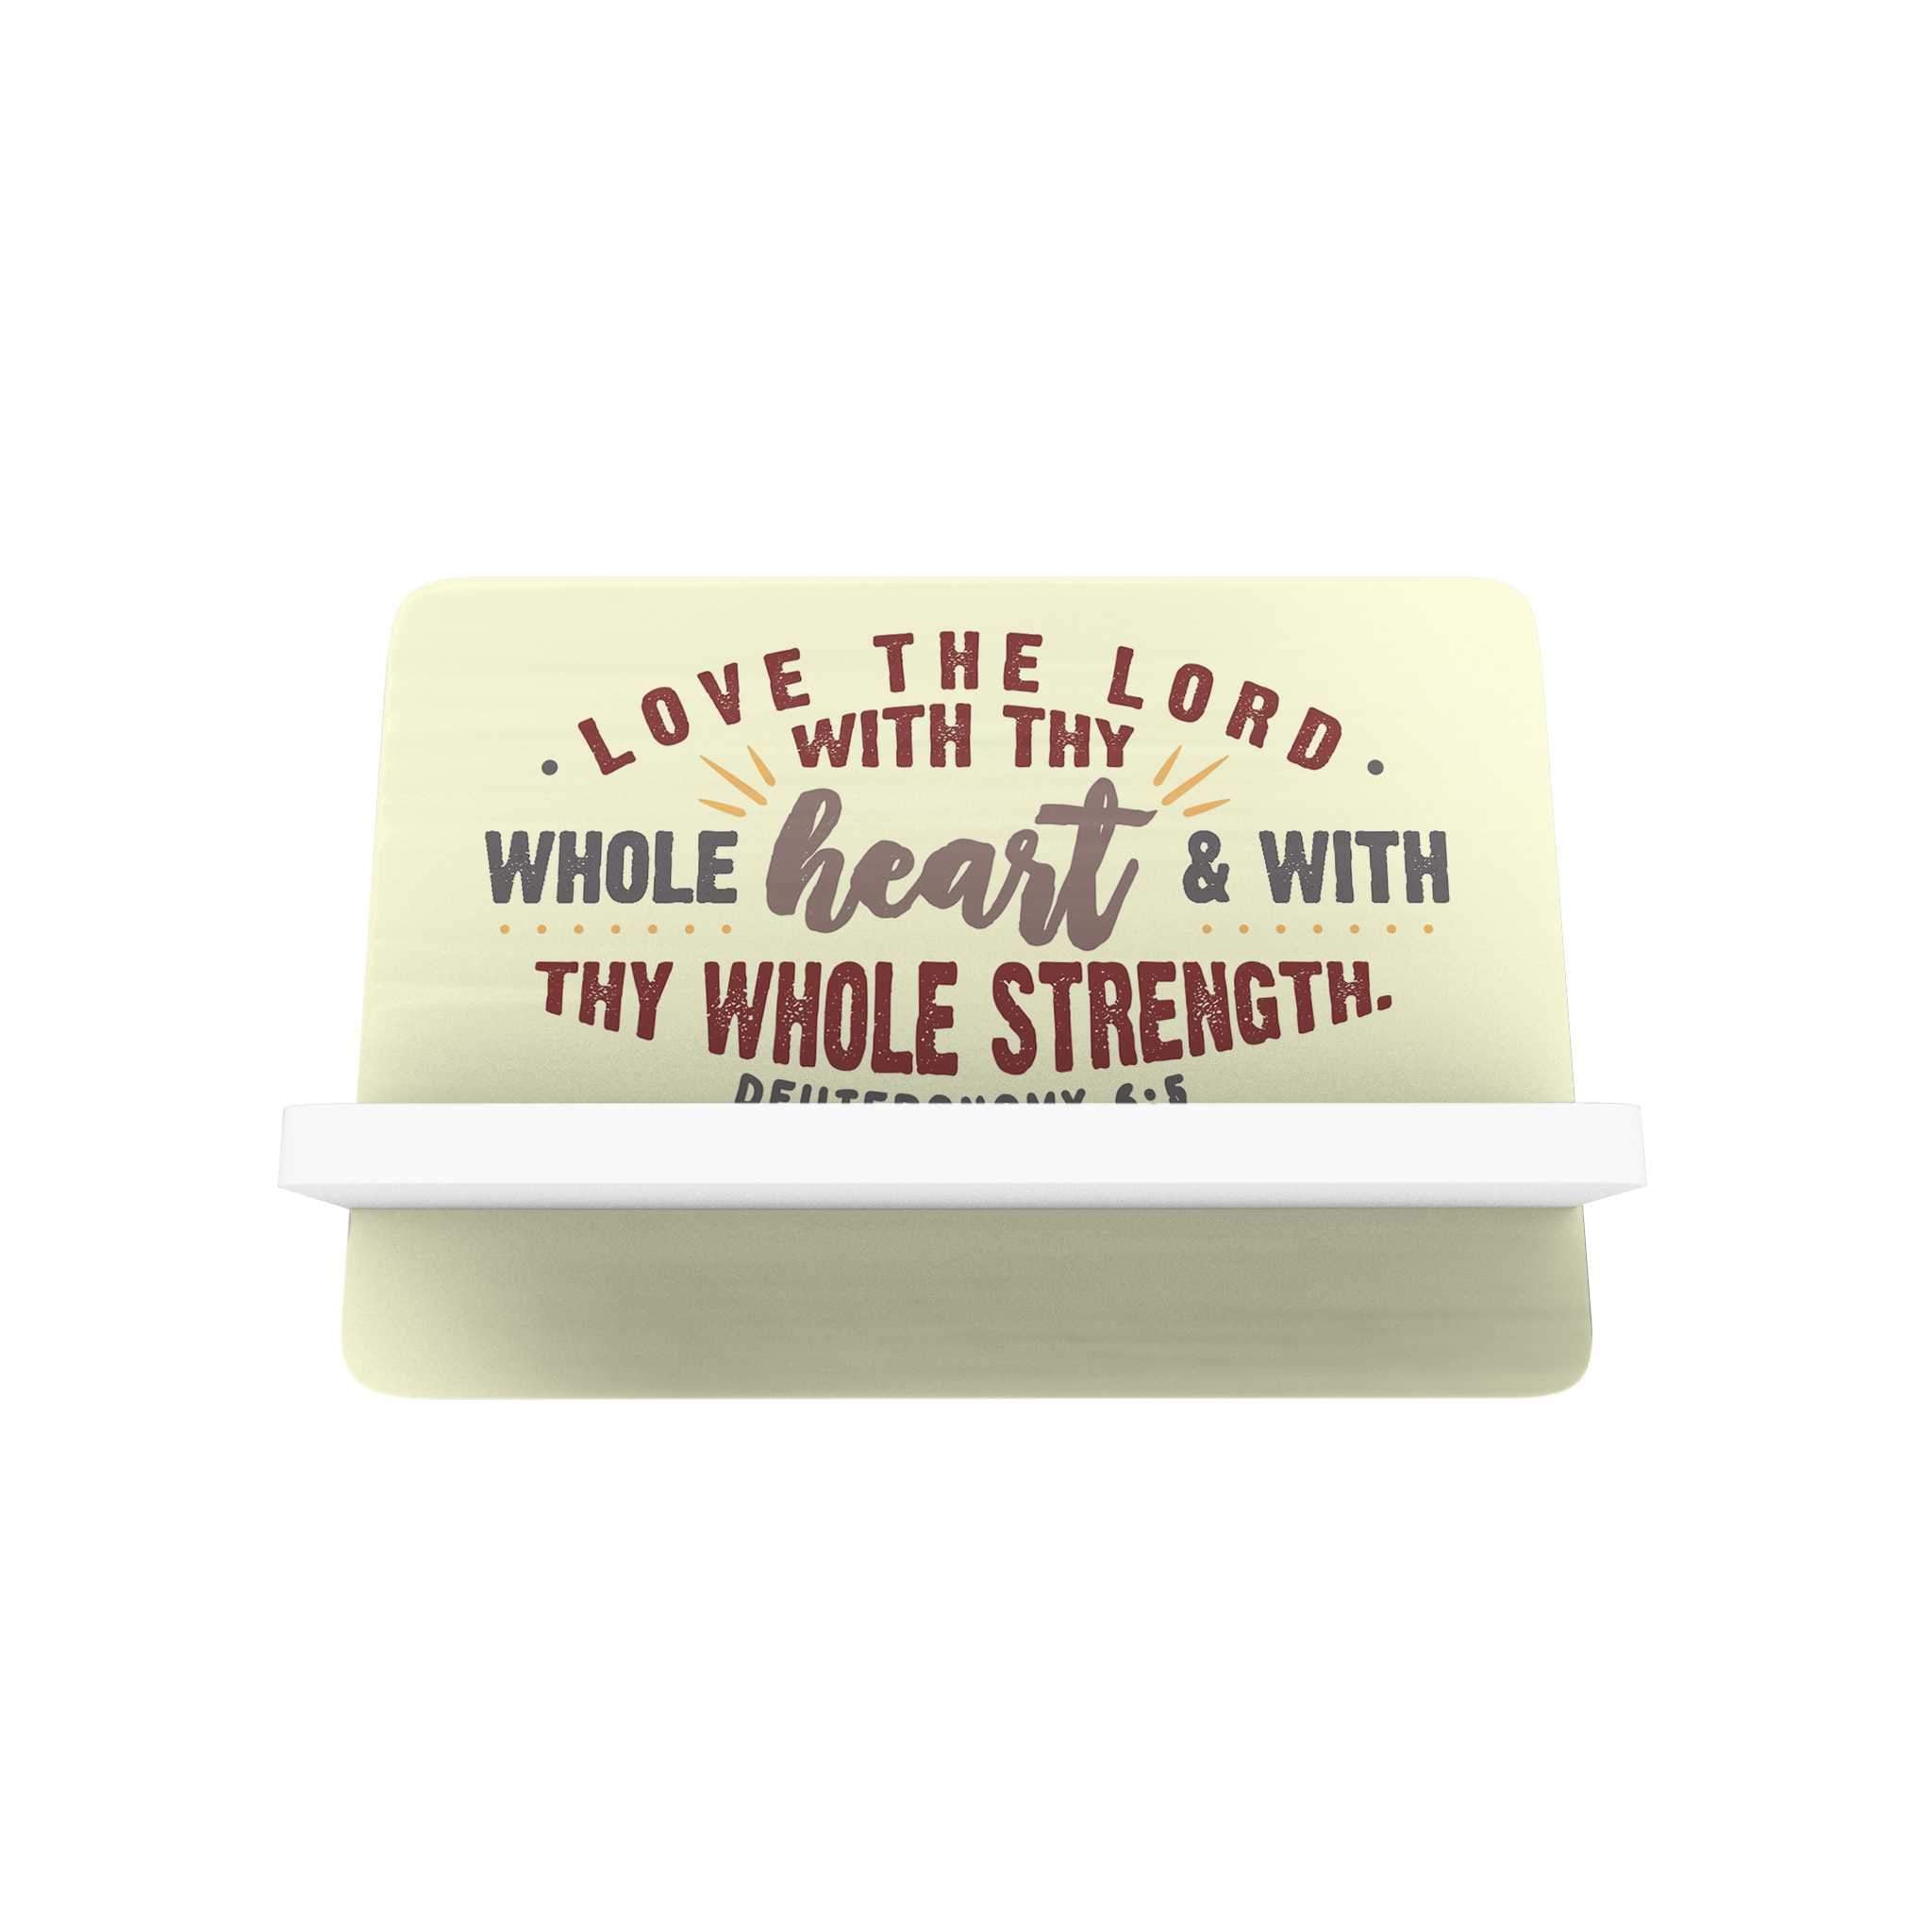 Words of Love Cellphone Holder: Love the Lord